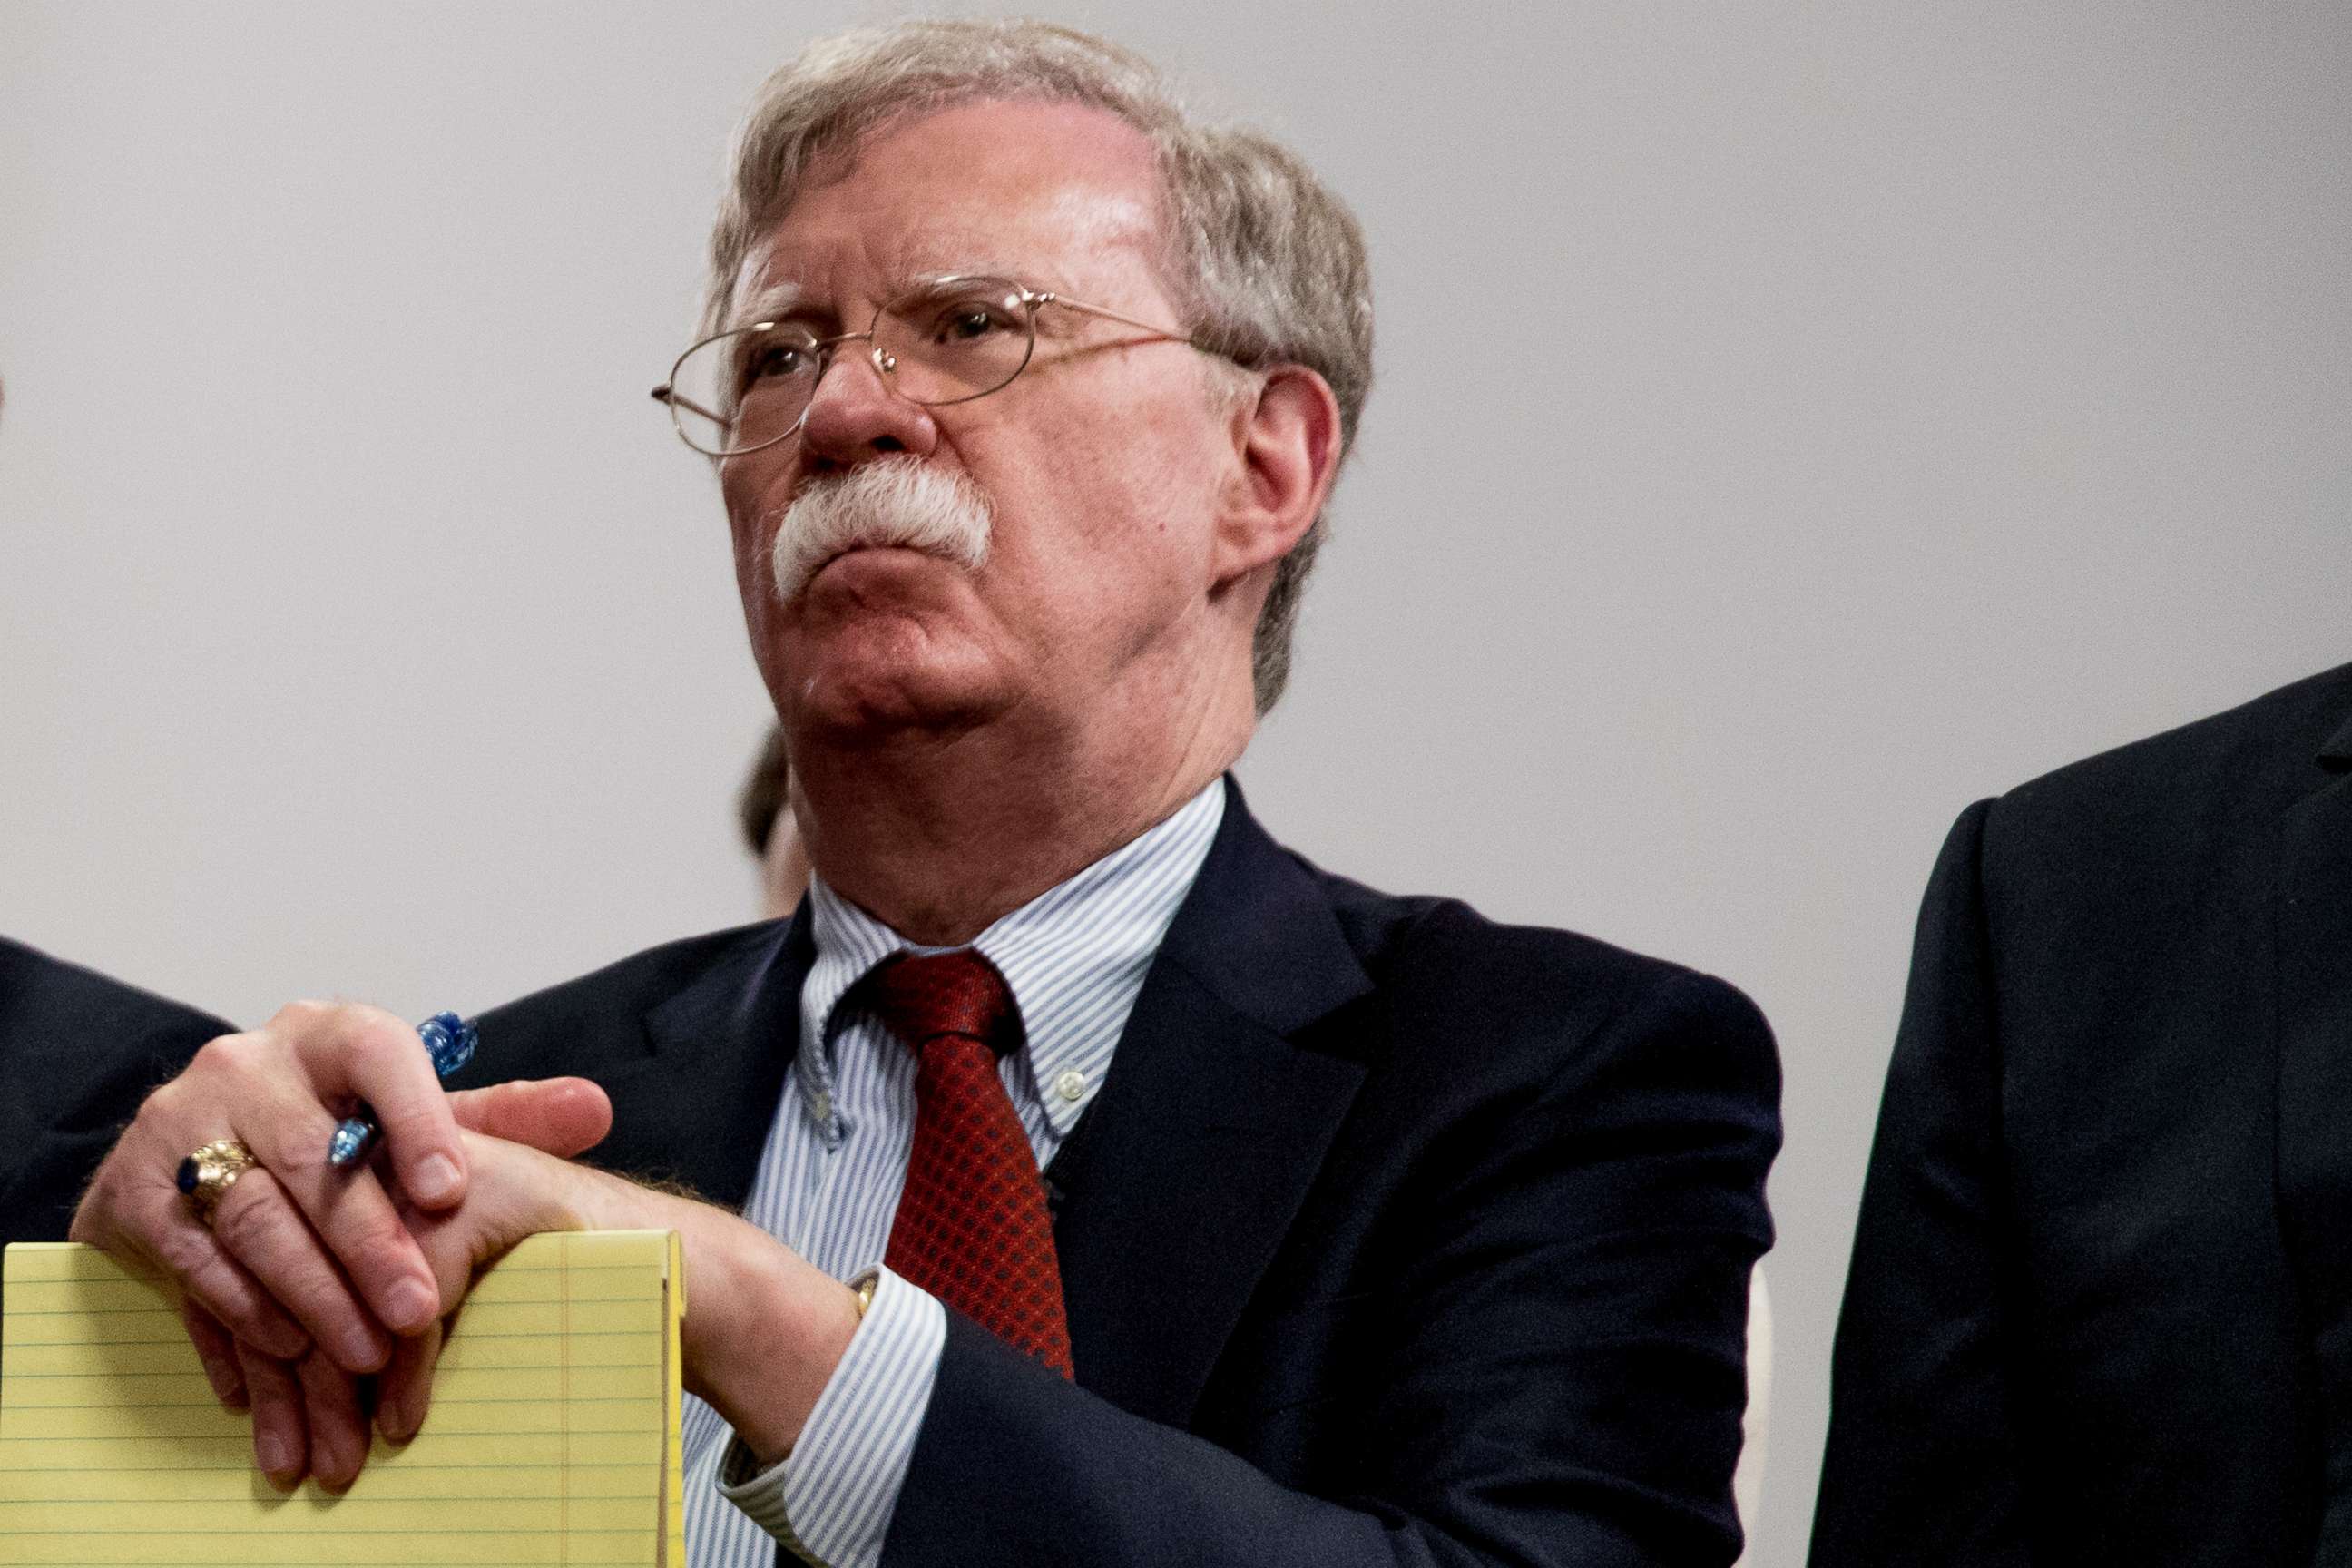 PHOTO: National Security Adviser John Bolton attends a meeting with President Donald Trump as he meets with Indian Prime Minister Narendra Modi at the G-7 summit in Biarritz, France, Aug. 26, 2019.